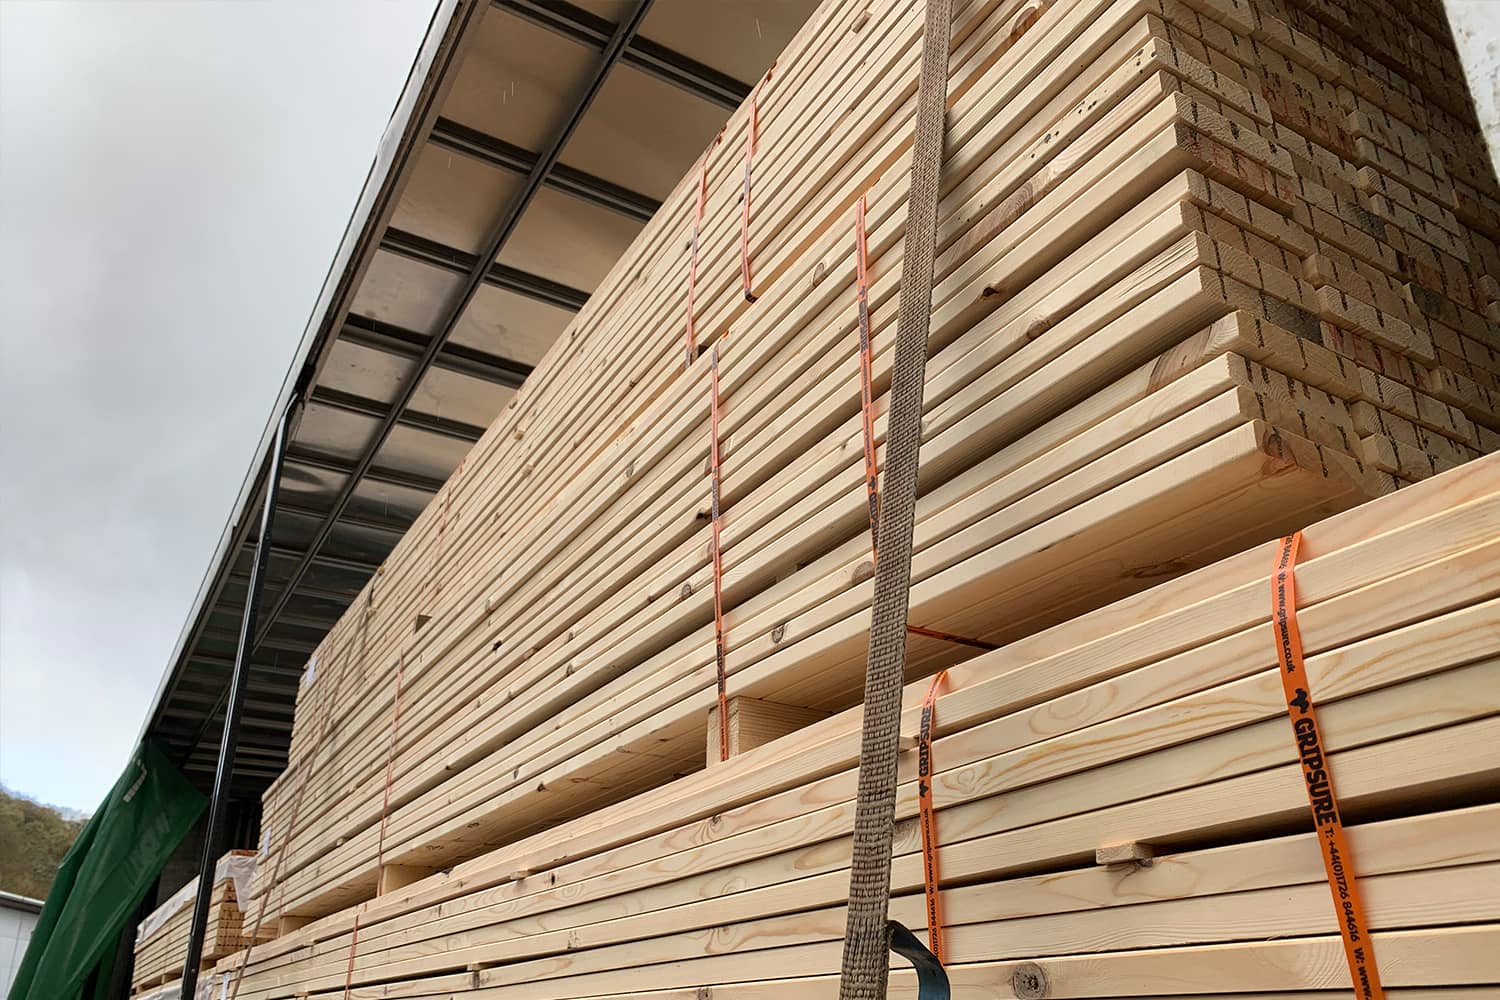 Lorry loaded with Gripsure timber deck boards